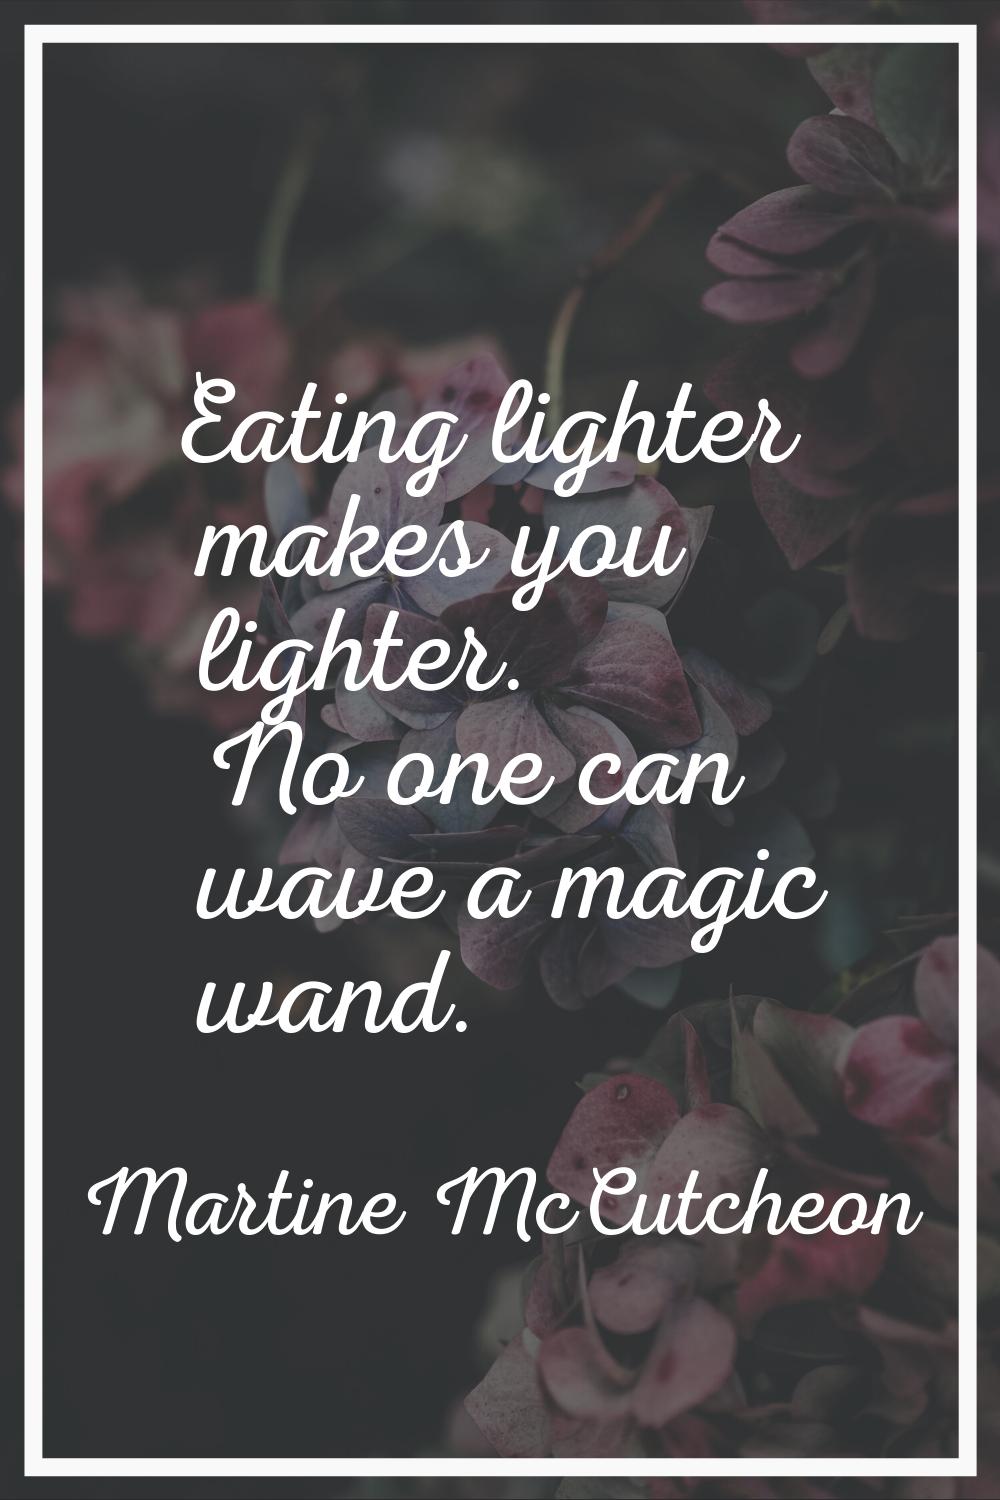 Eating lighter makes you lighter. No one can wave a magic wand.